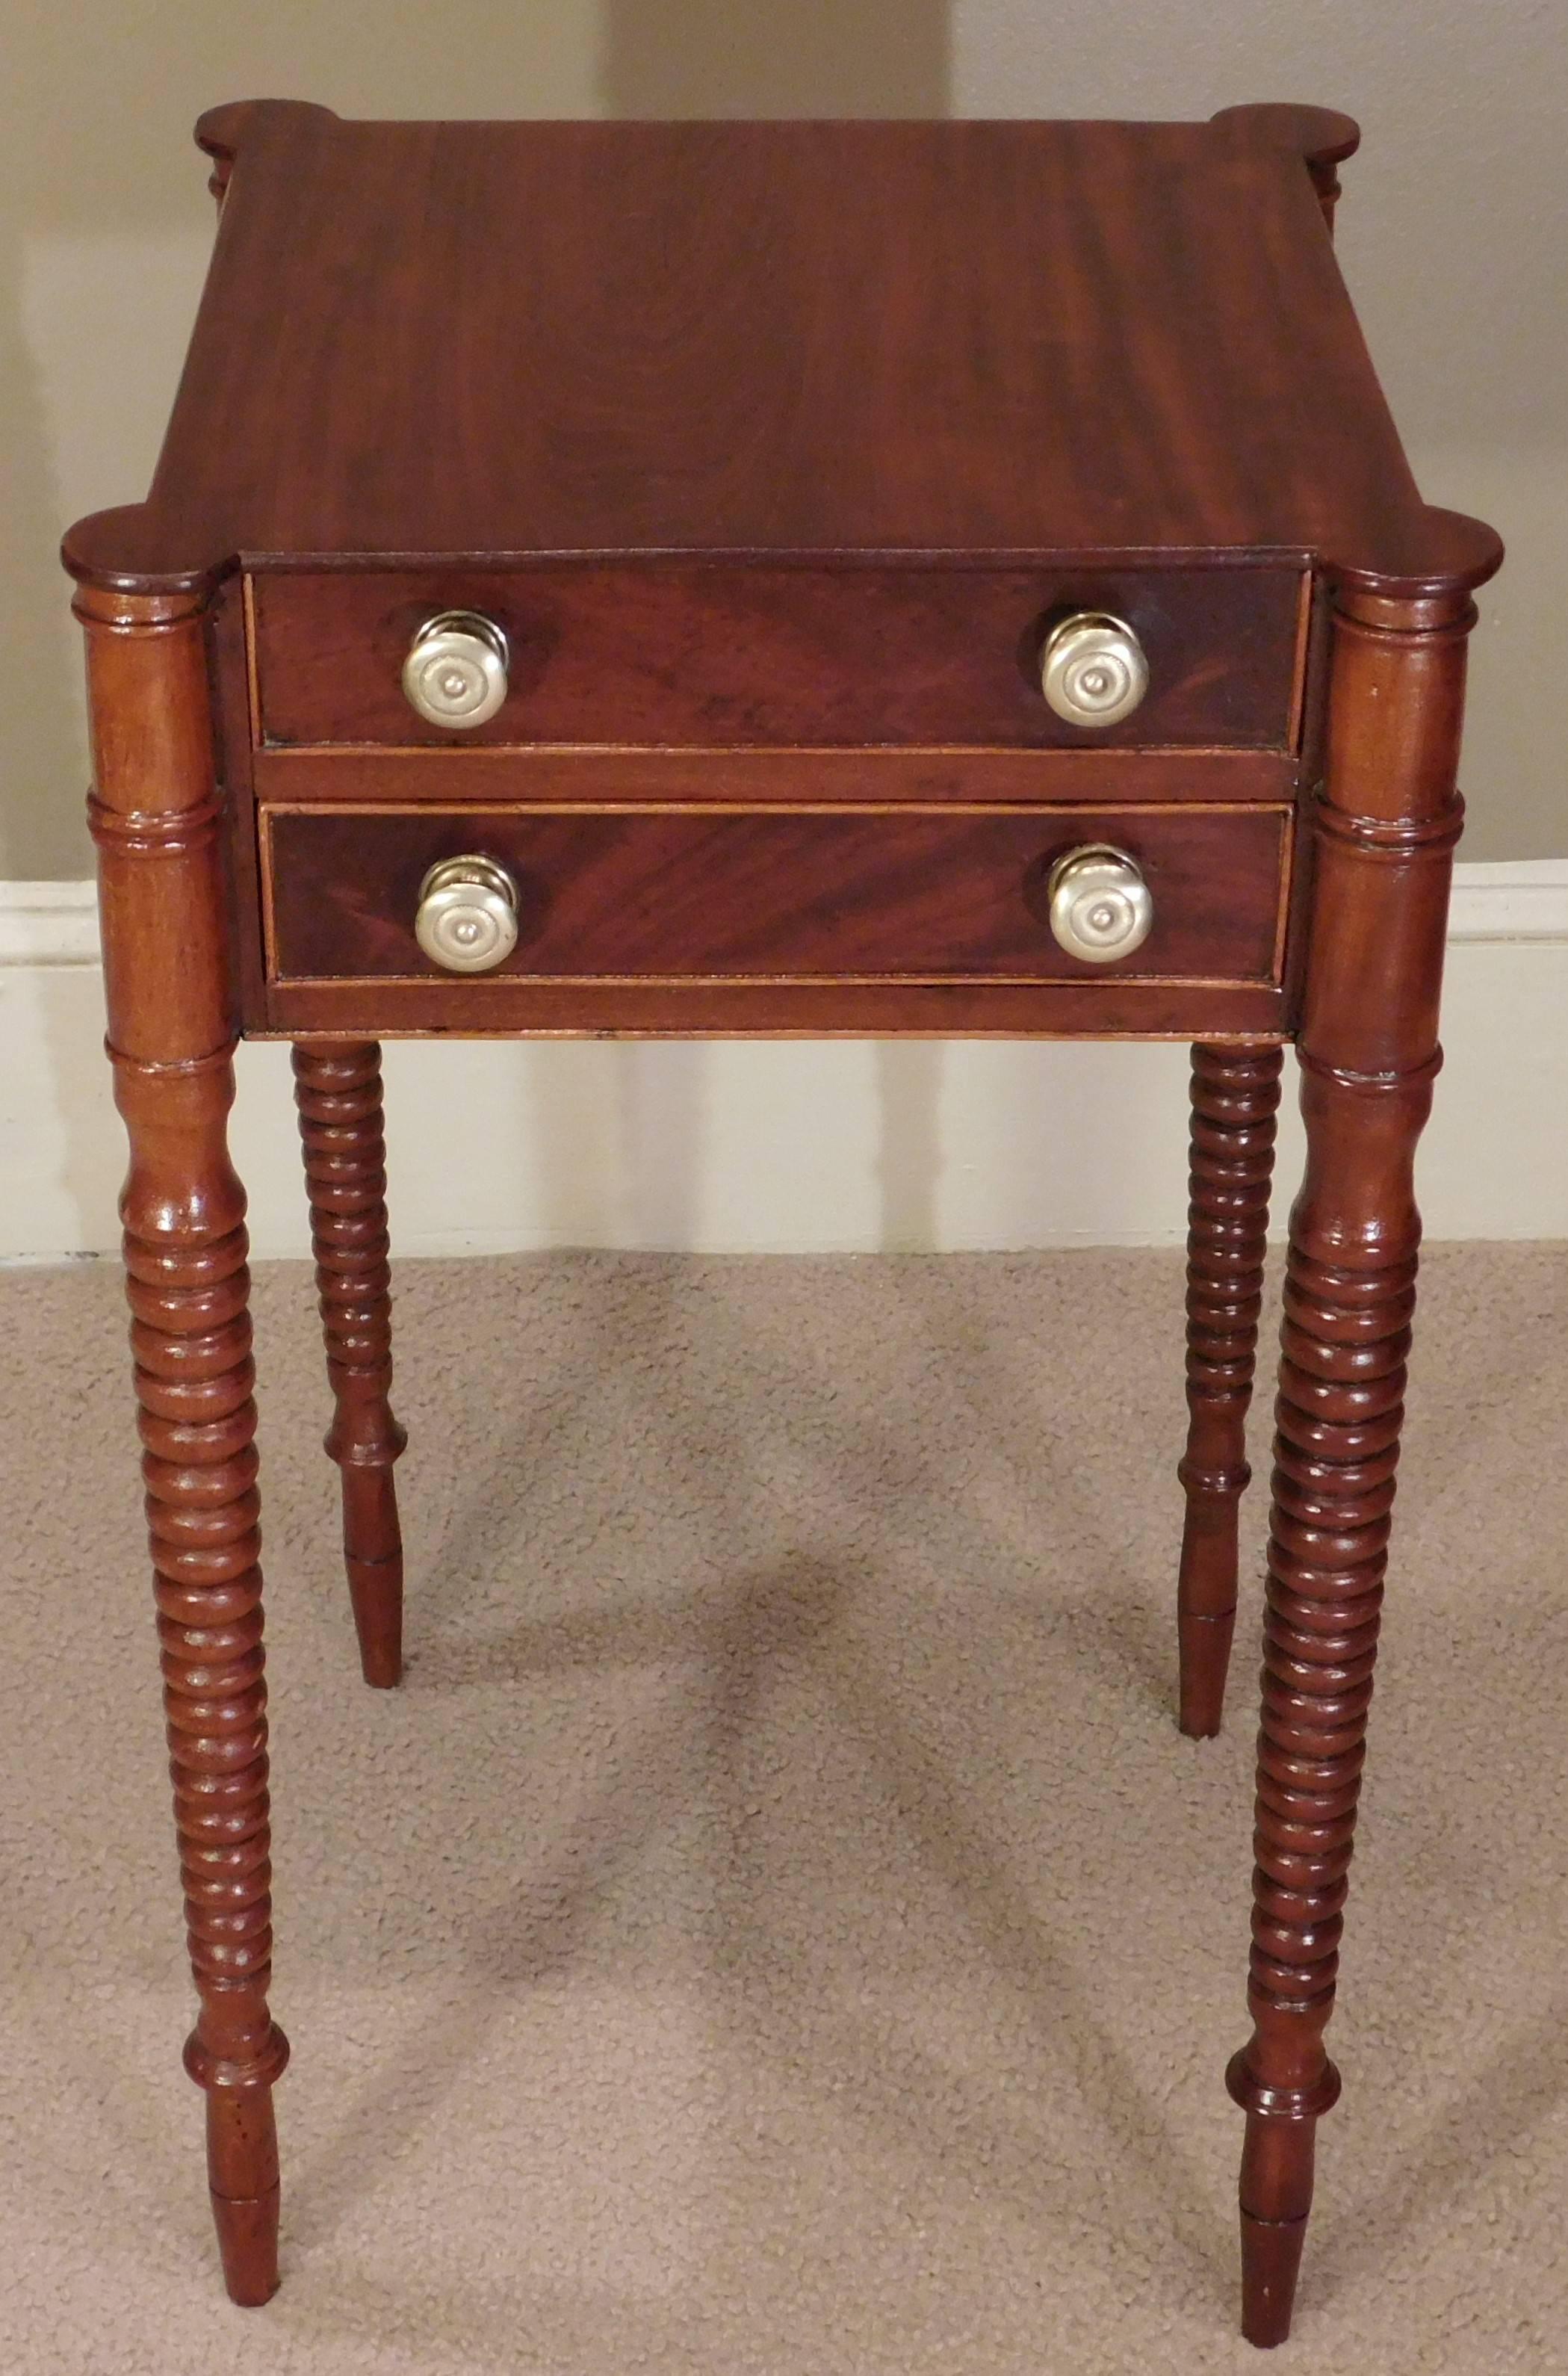 This Sheraton work table is figured mahogany and cherry with poplar secondary wood and old replaced solid brass pulls. The stand is finished on all four sides with turned turret corners above spiral turned legs.